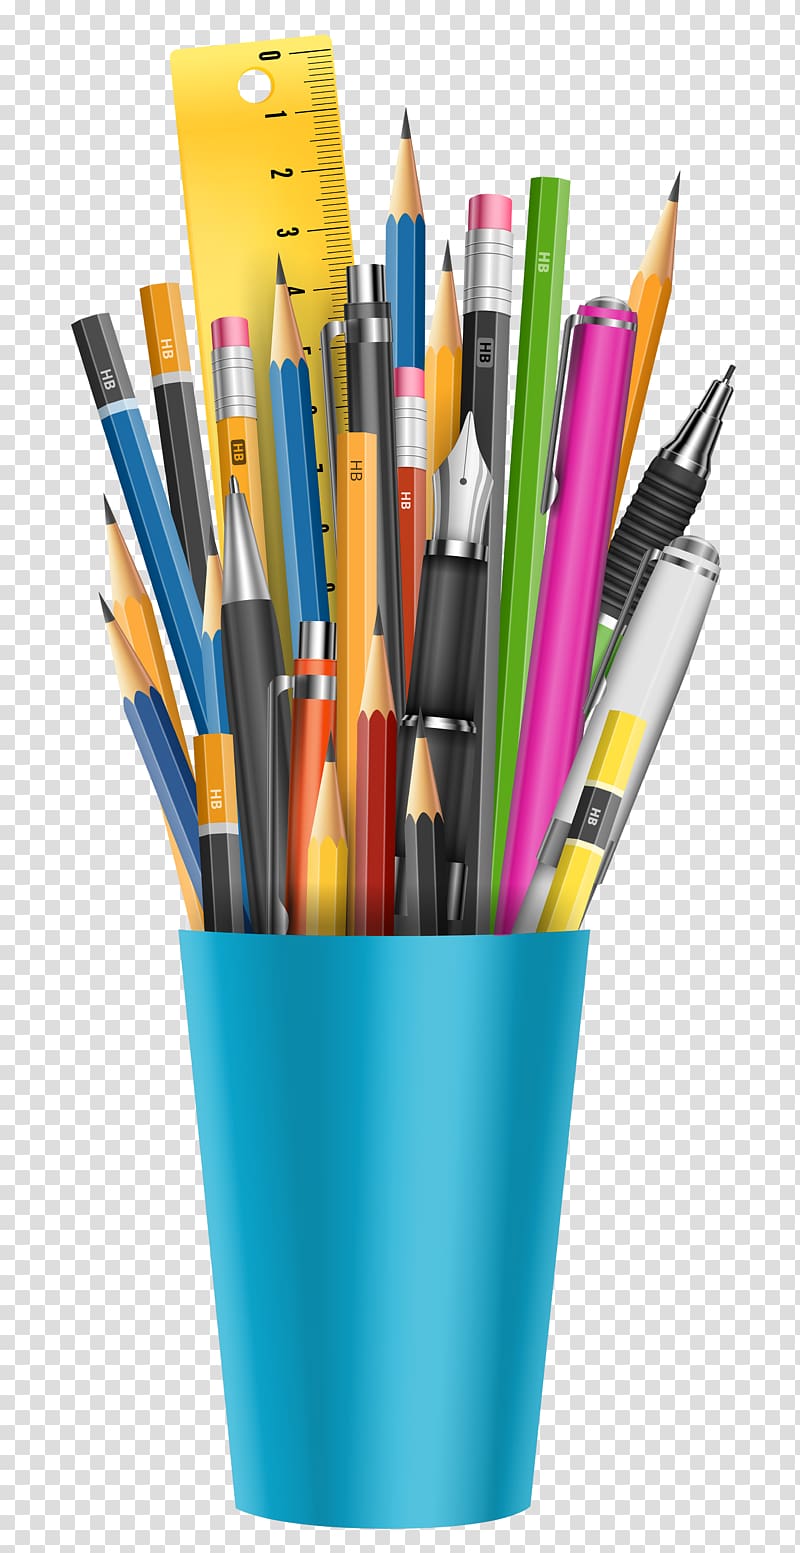 pencil clipart stationery